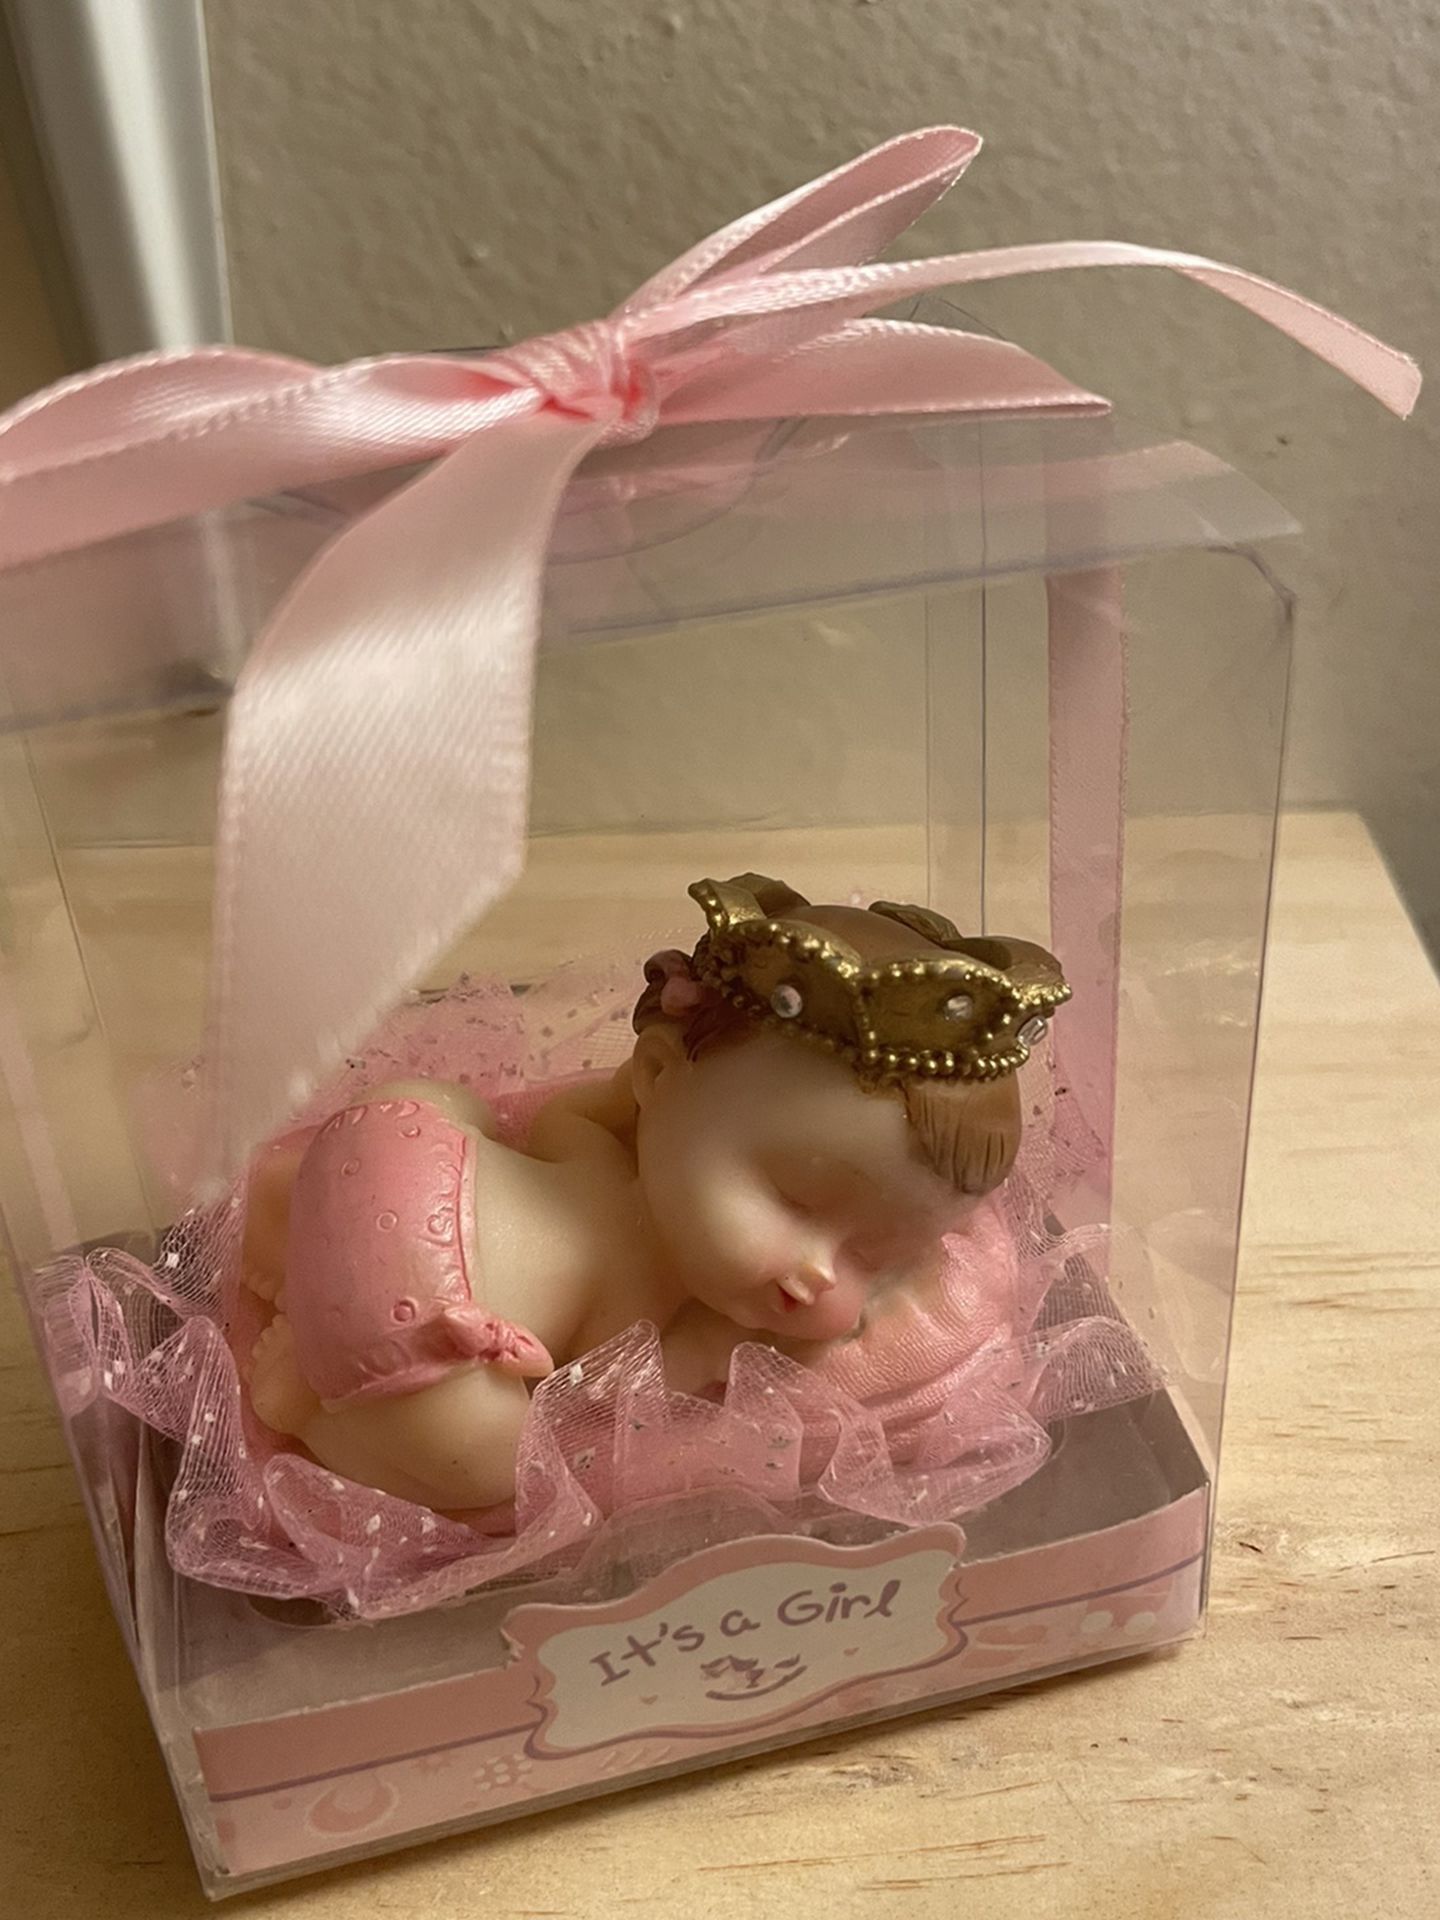 Baby Girl Figurine Statue It’s A Girl Expecting Mother Gift Baby Shower